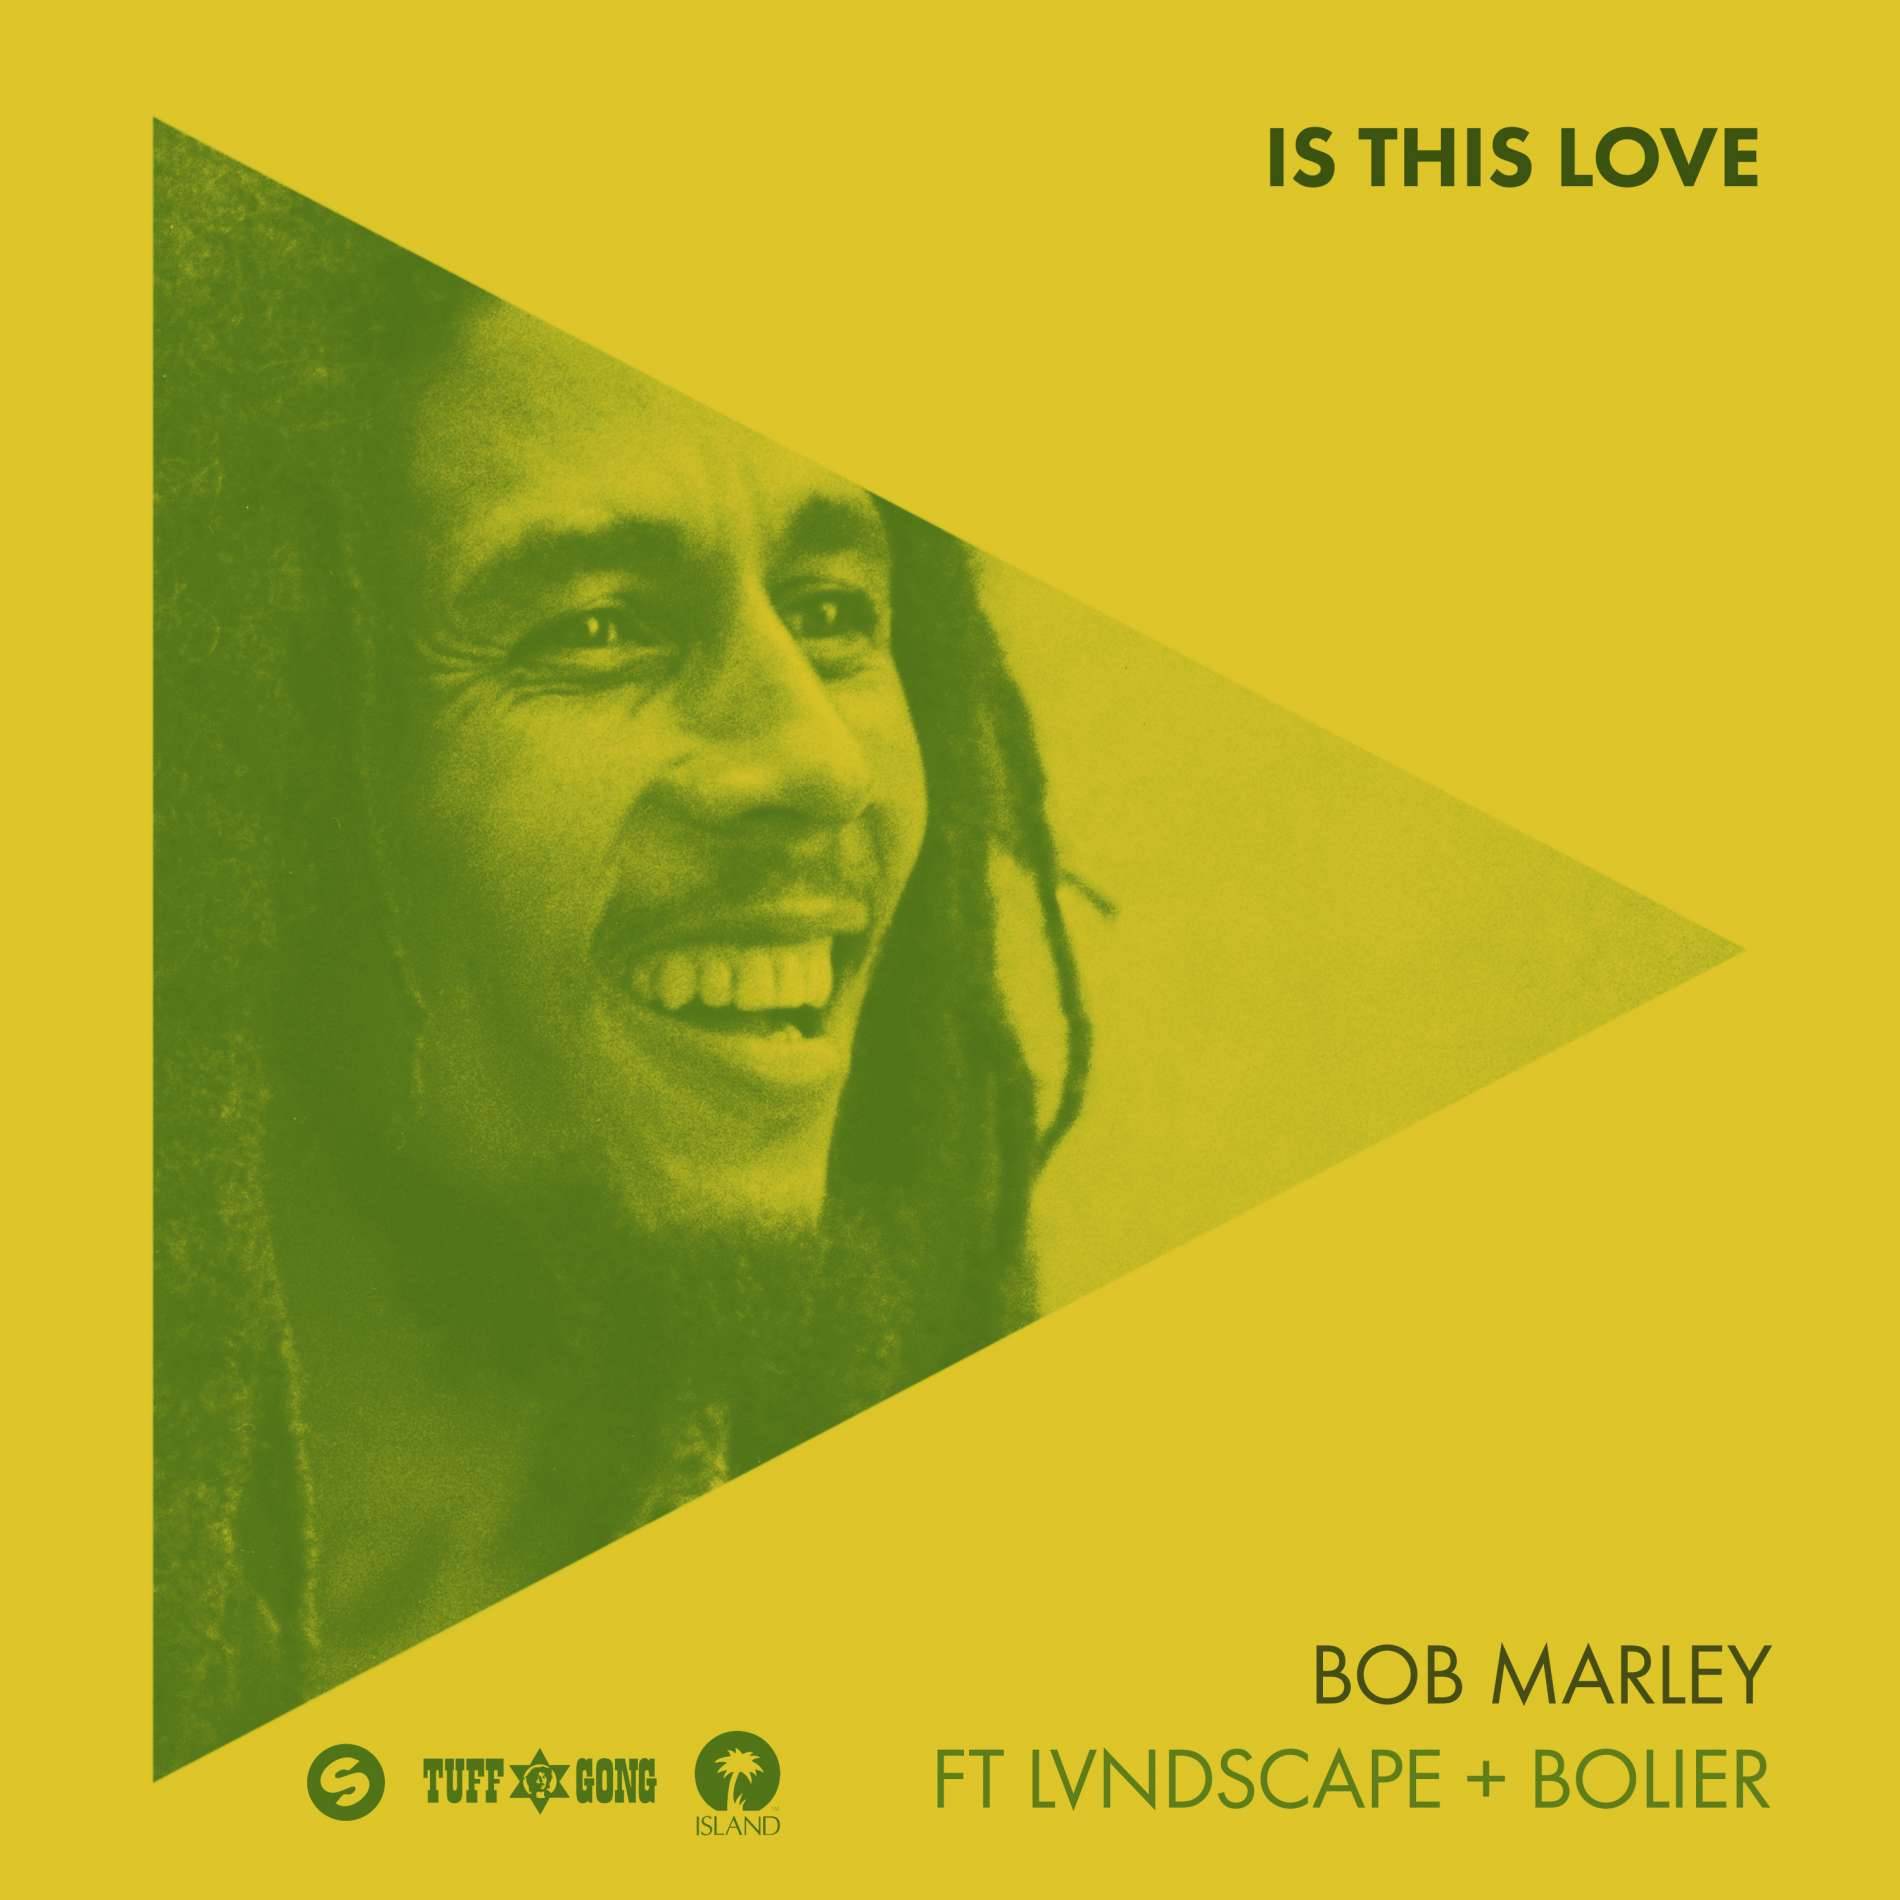 Bob Marley vs LVNDSCAPE & Bolier - 'Is This Love' video is here!